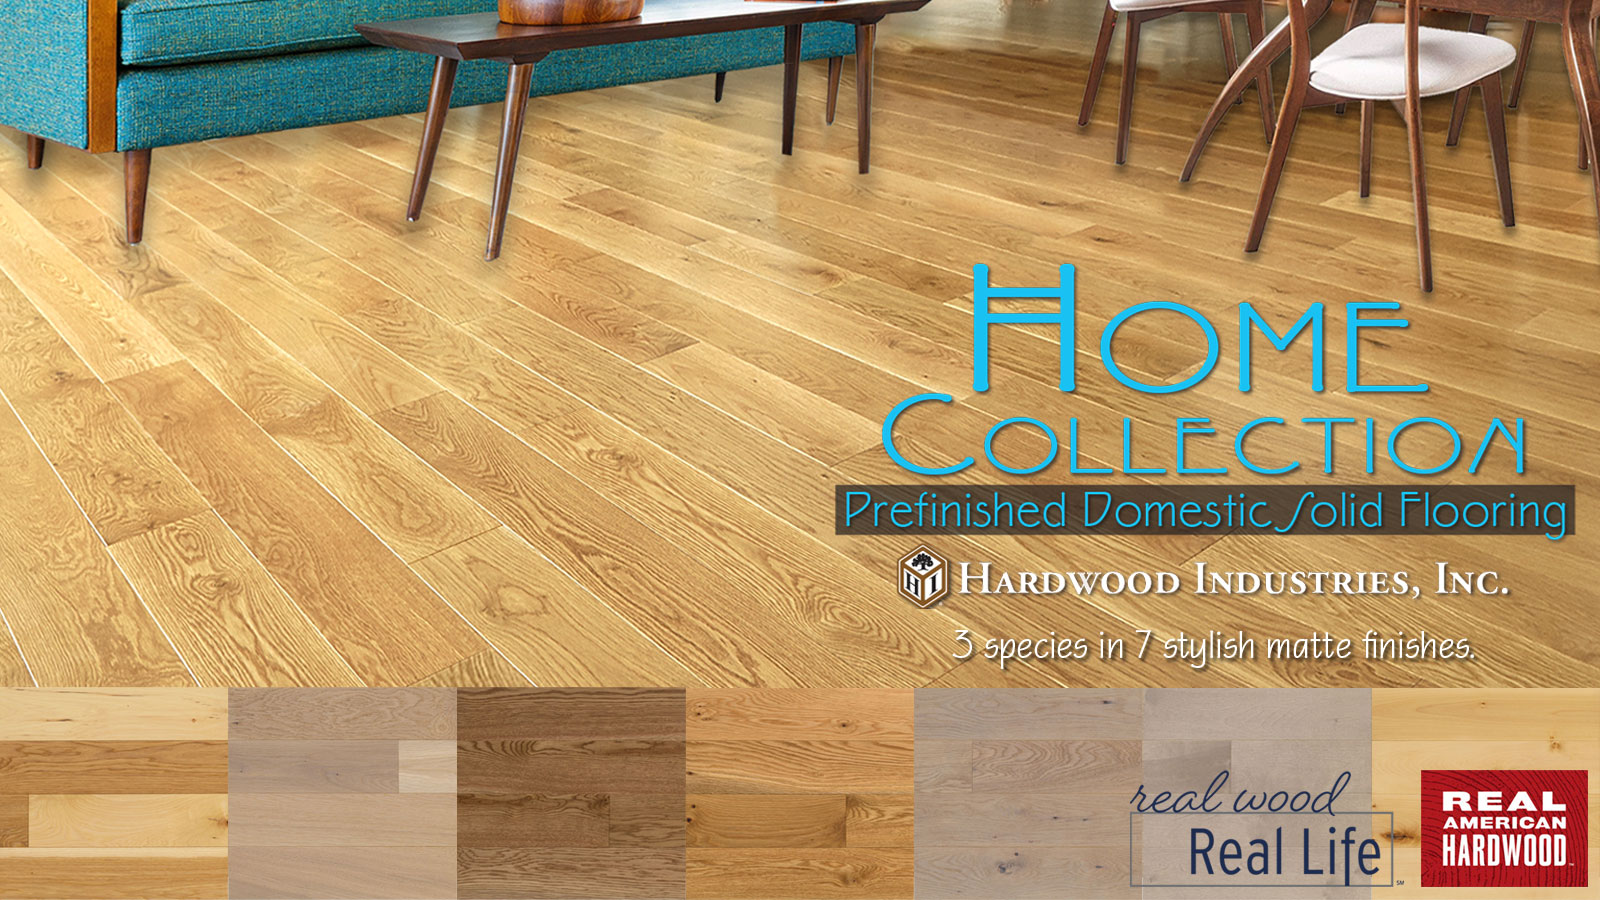 Introducing our new Home Collection line of Prefinished Domestic Solid hardwood flooring!